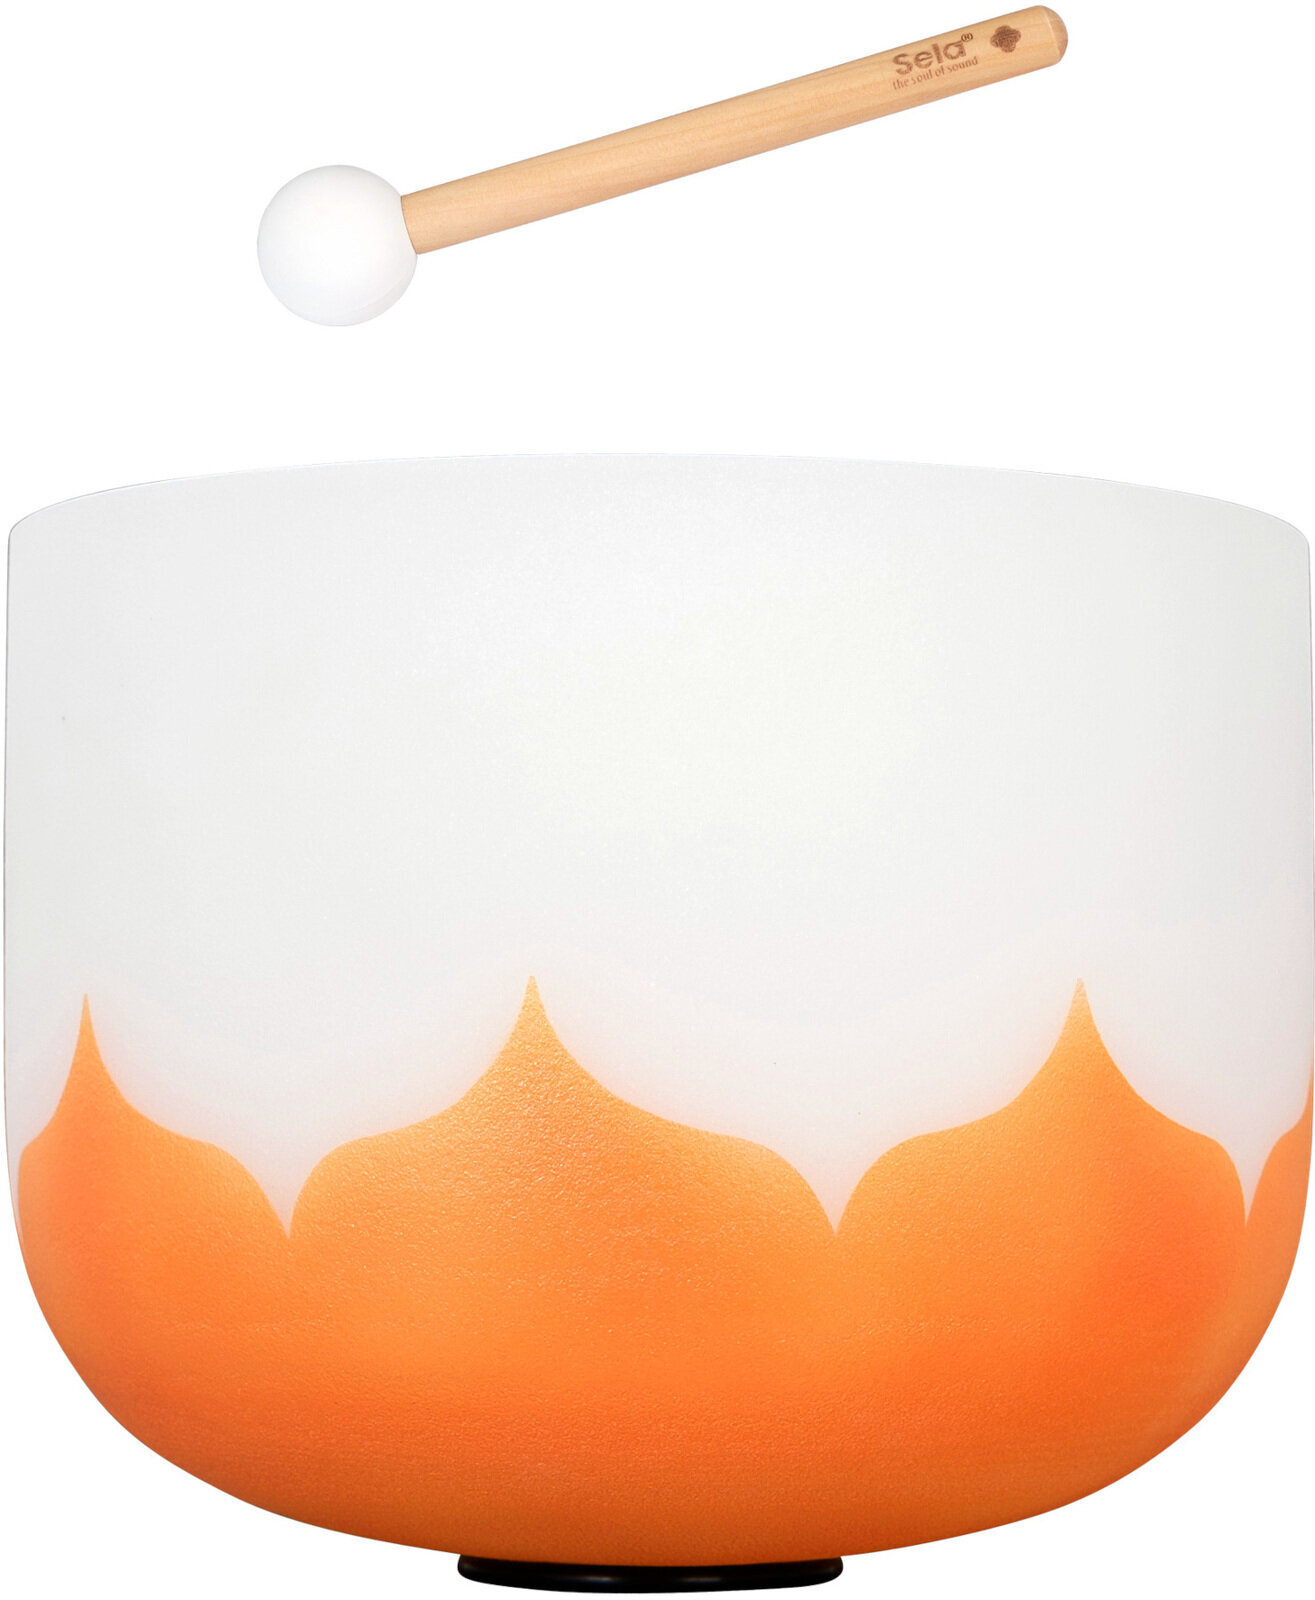 Percussion for music therapy Sela 10" Crystal Singing Bowl Lotus 440 Hz D - Orange (Sacral Chakra). incl. 1 Wood Mallet